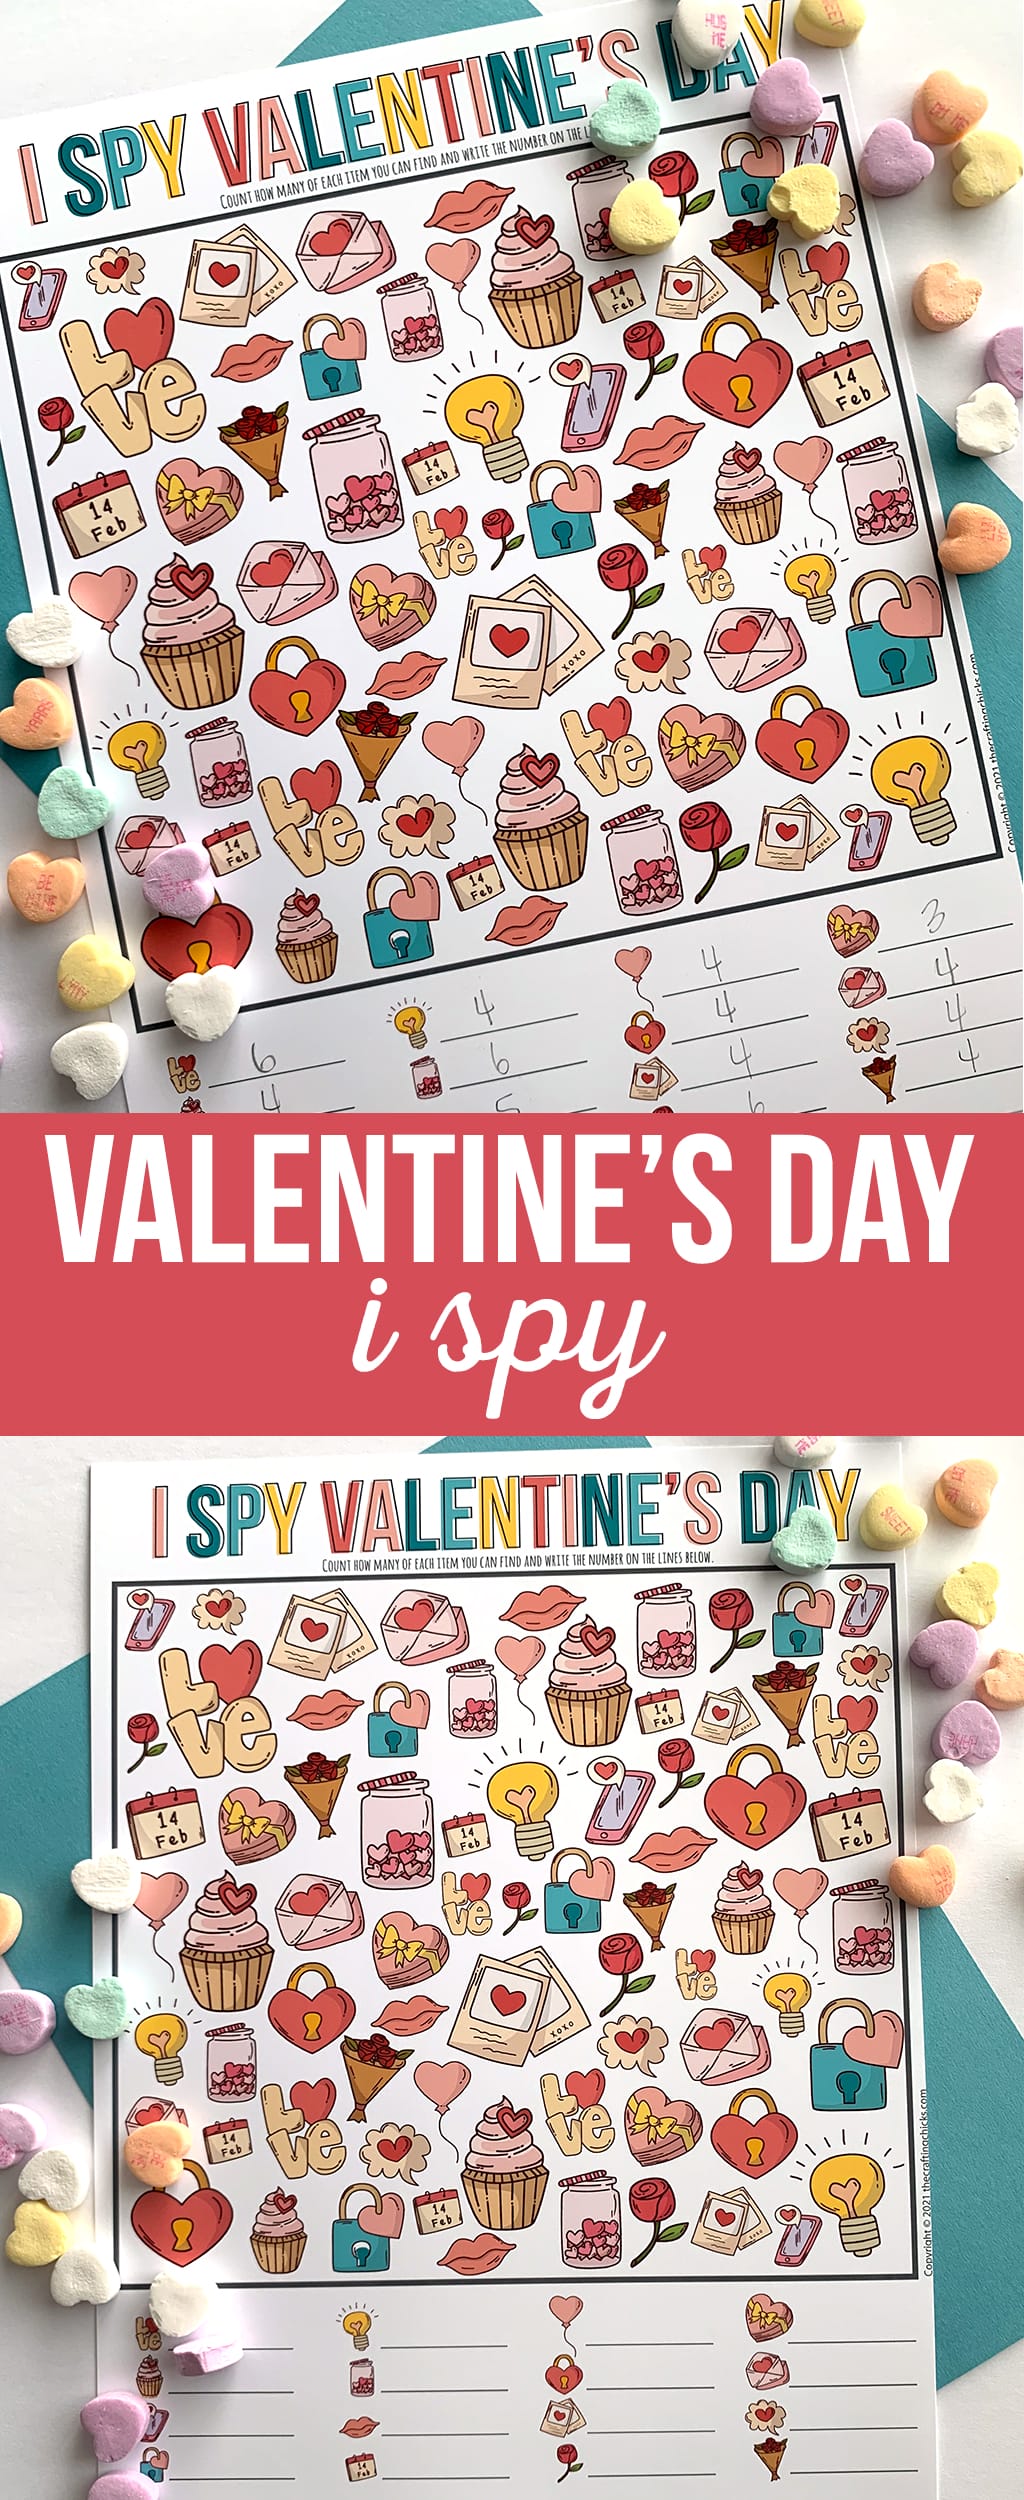 I Spy Valentine Free printable on a teal backdrop with conversation heart candies.